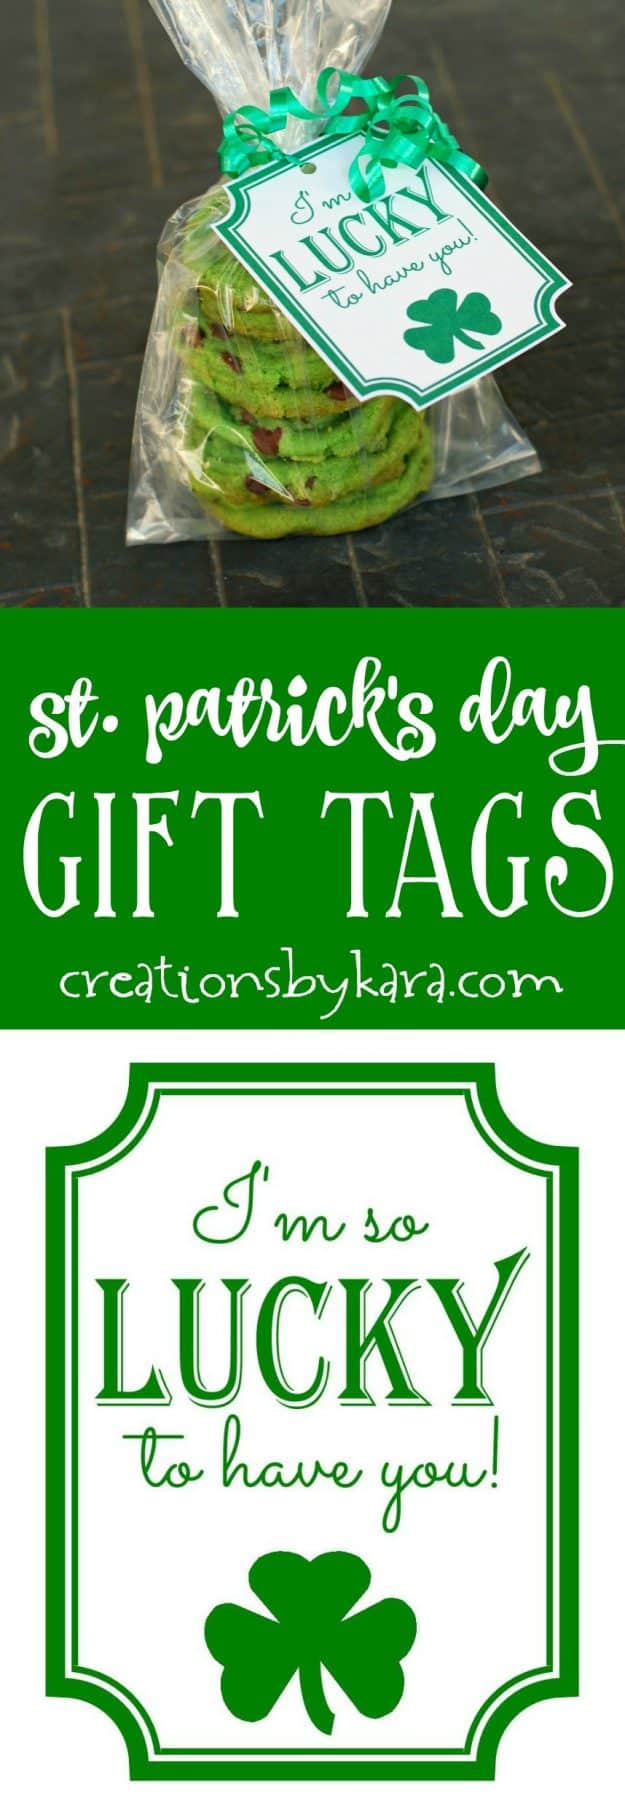 st-patrick-s-day-gift-tags-free-printables-add-a-little-adventure